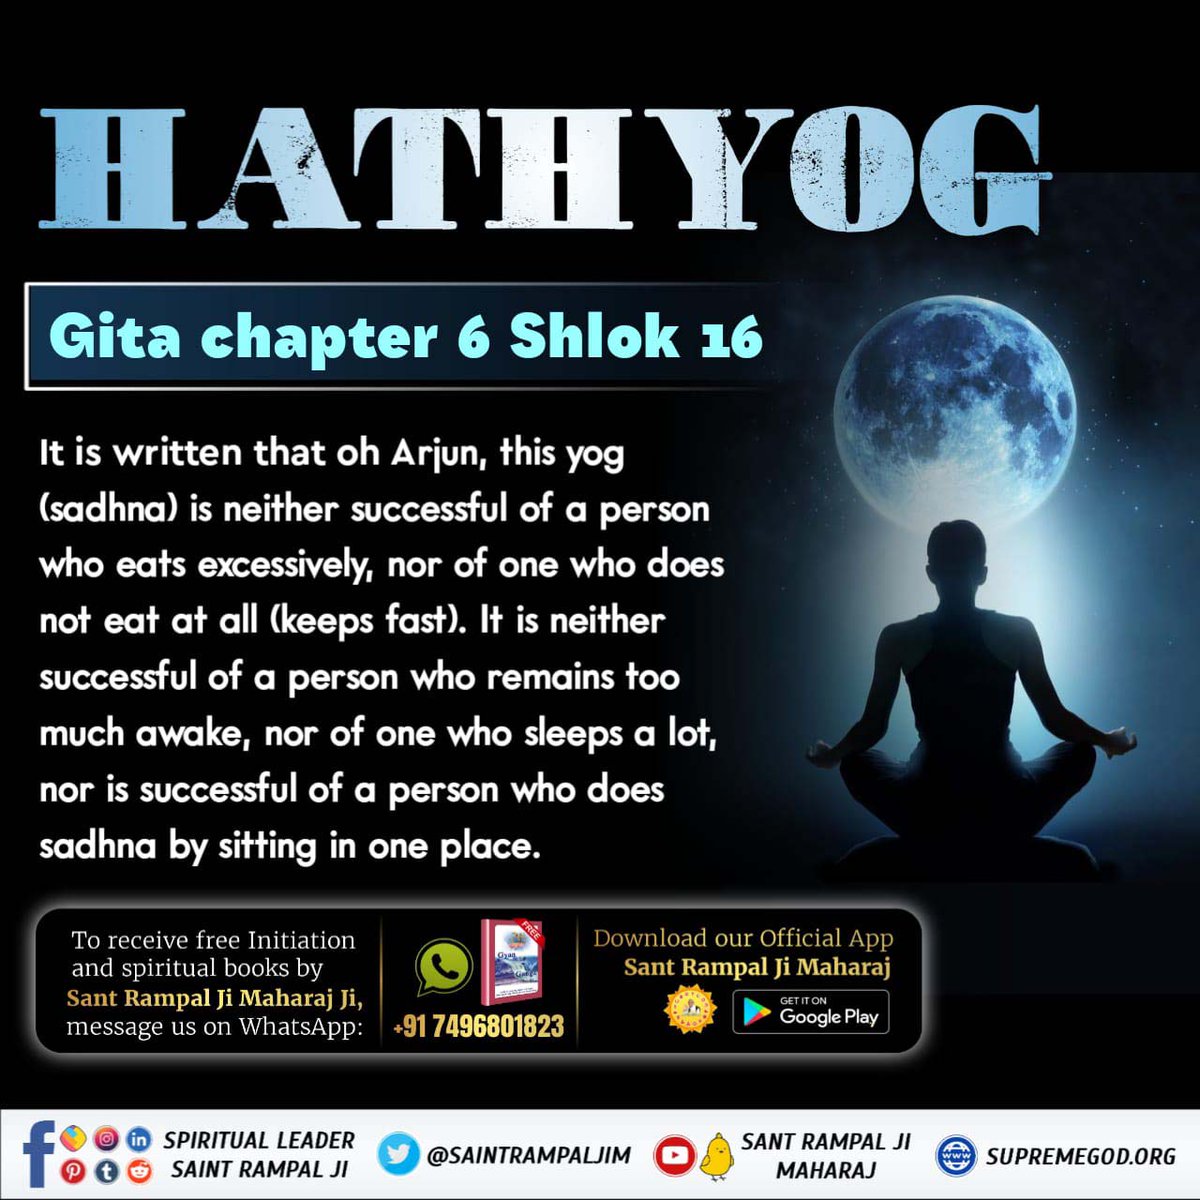 #What_Is_Meditation Gita chapter 6 Shlok 16 It is written that oh Arjun, this yog (sadhna) is neither successful of a person who eats excessively, nor of one who does not eat at all (keeps fast). ~ Sant Rampal Ji Maharaj #GodMorningSunday